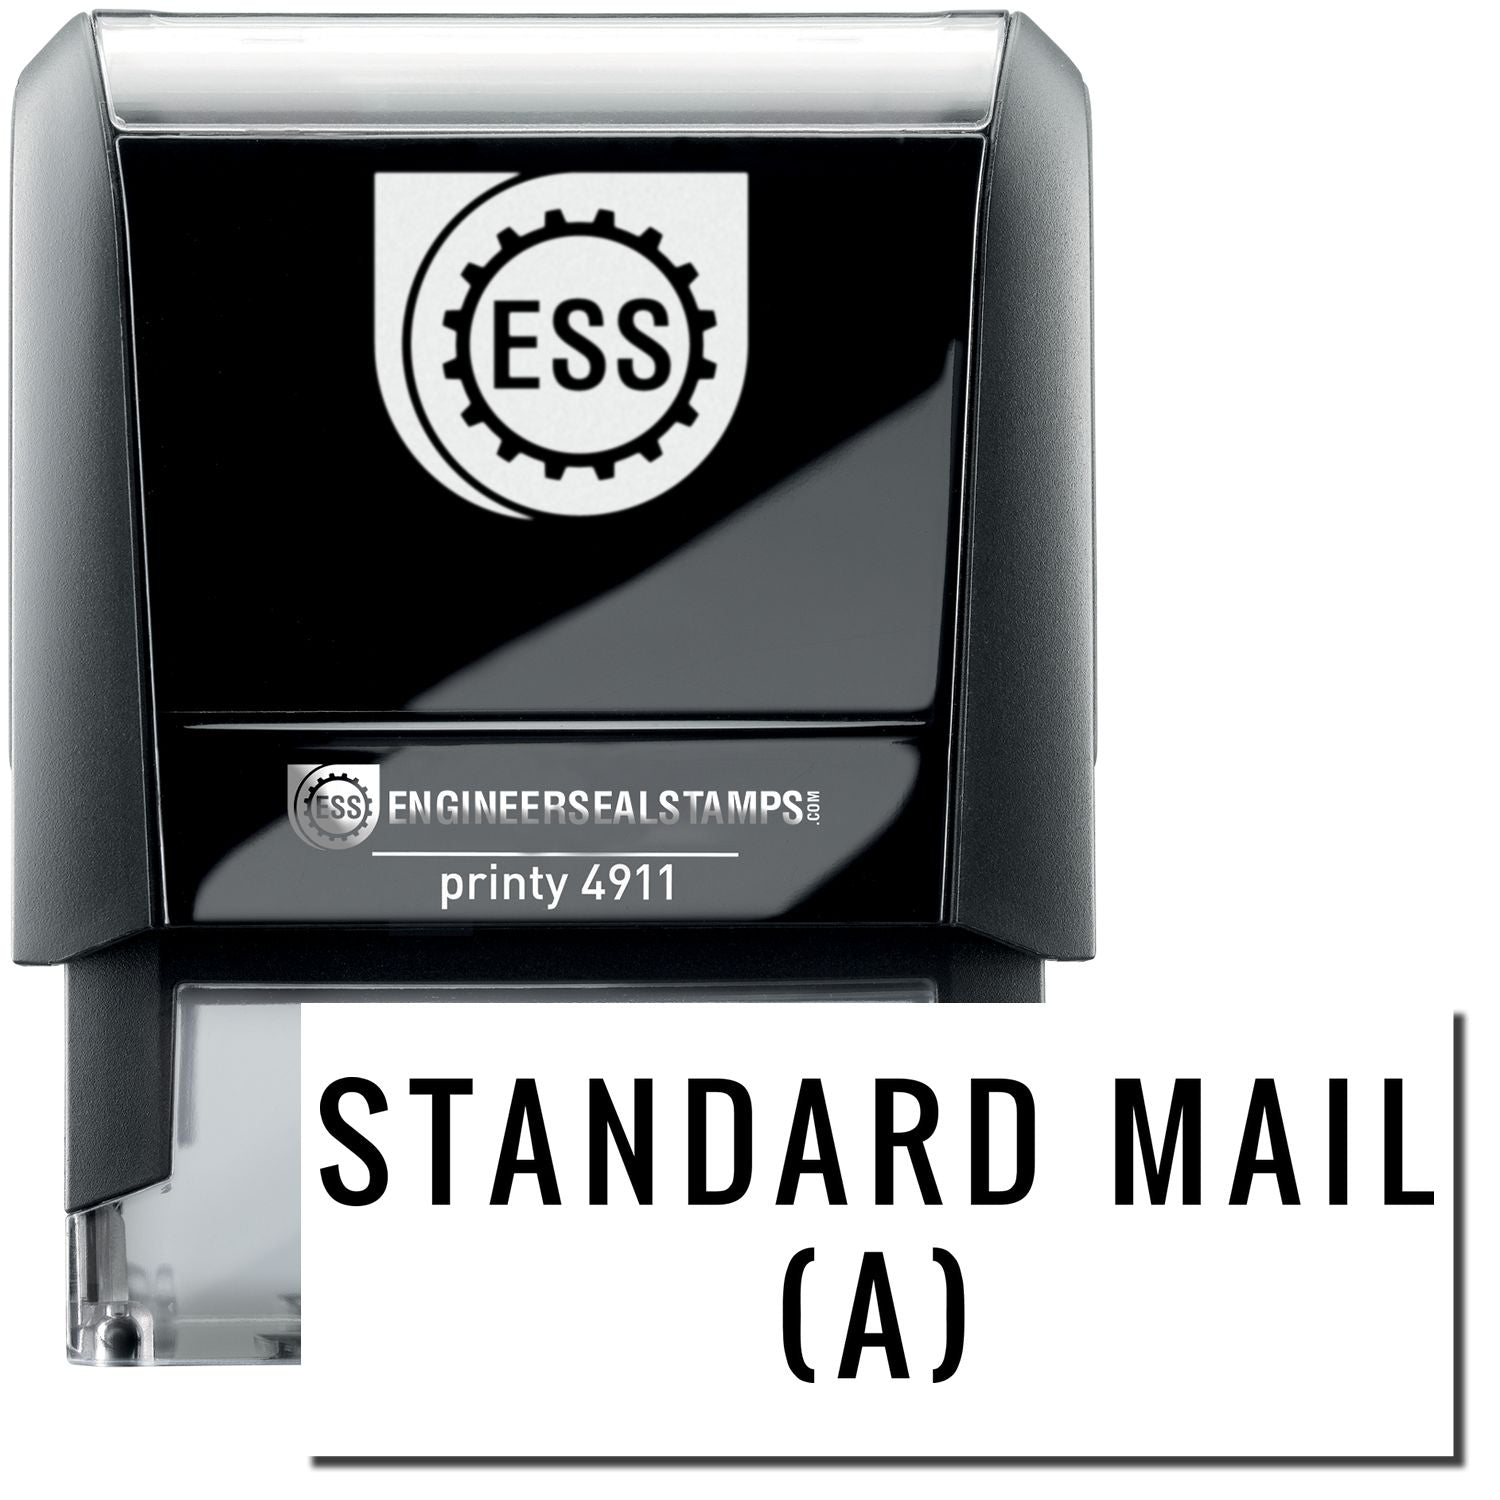 A self-inking stamp with a stamped image showing how the text "STANDARD MAIL (A)" is displayed after stamping.